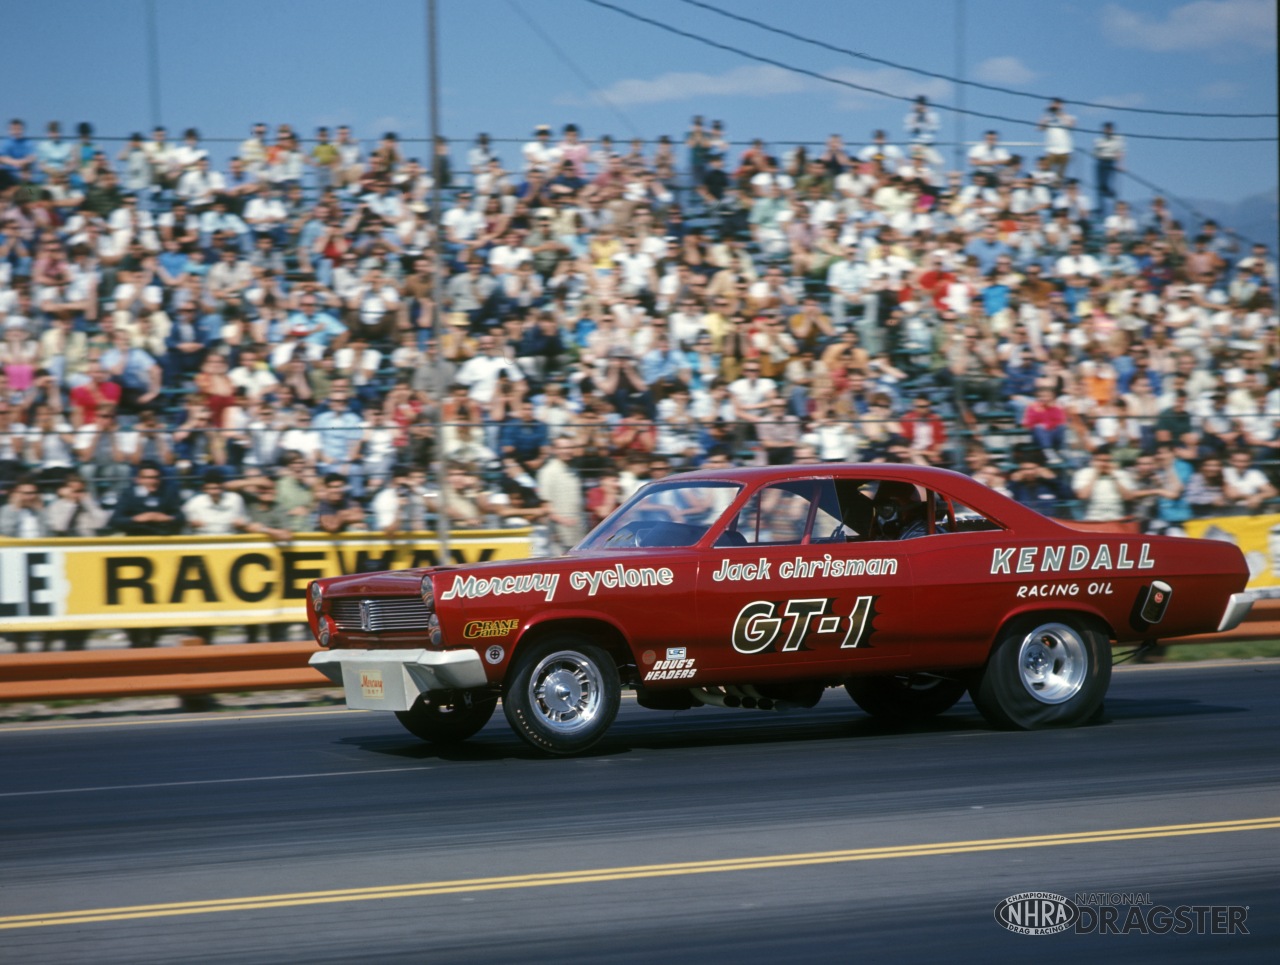 Gallery Check Out These Iconic Funny Cars From The 1960s Nhra